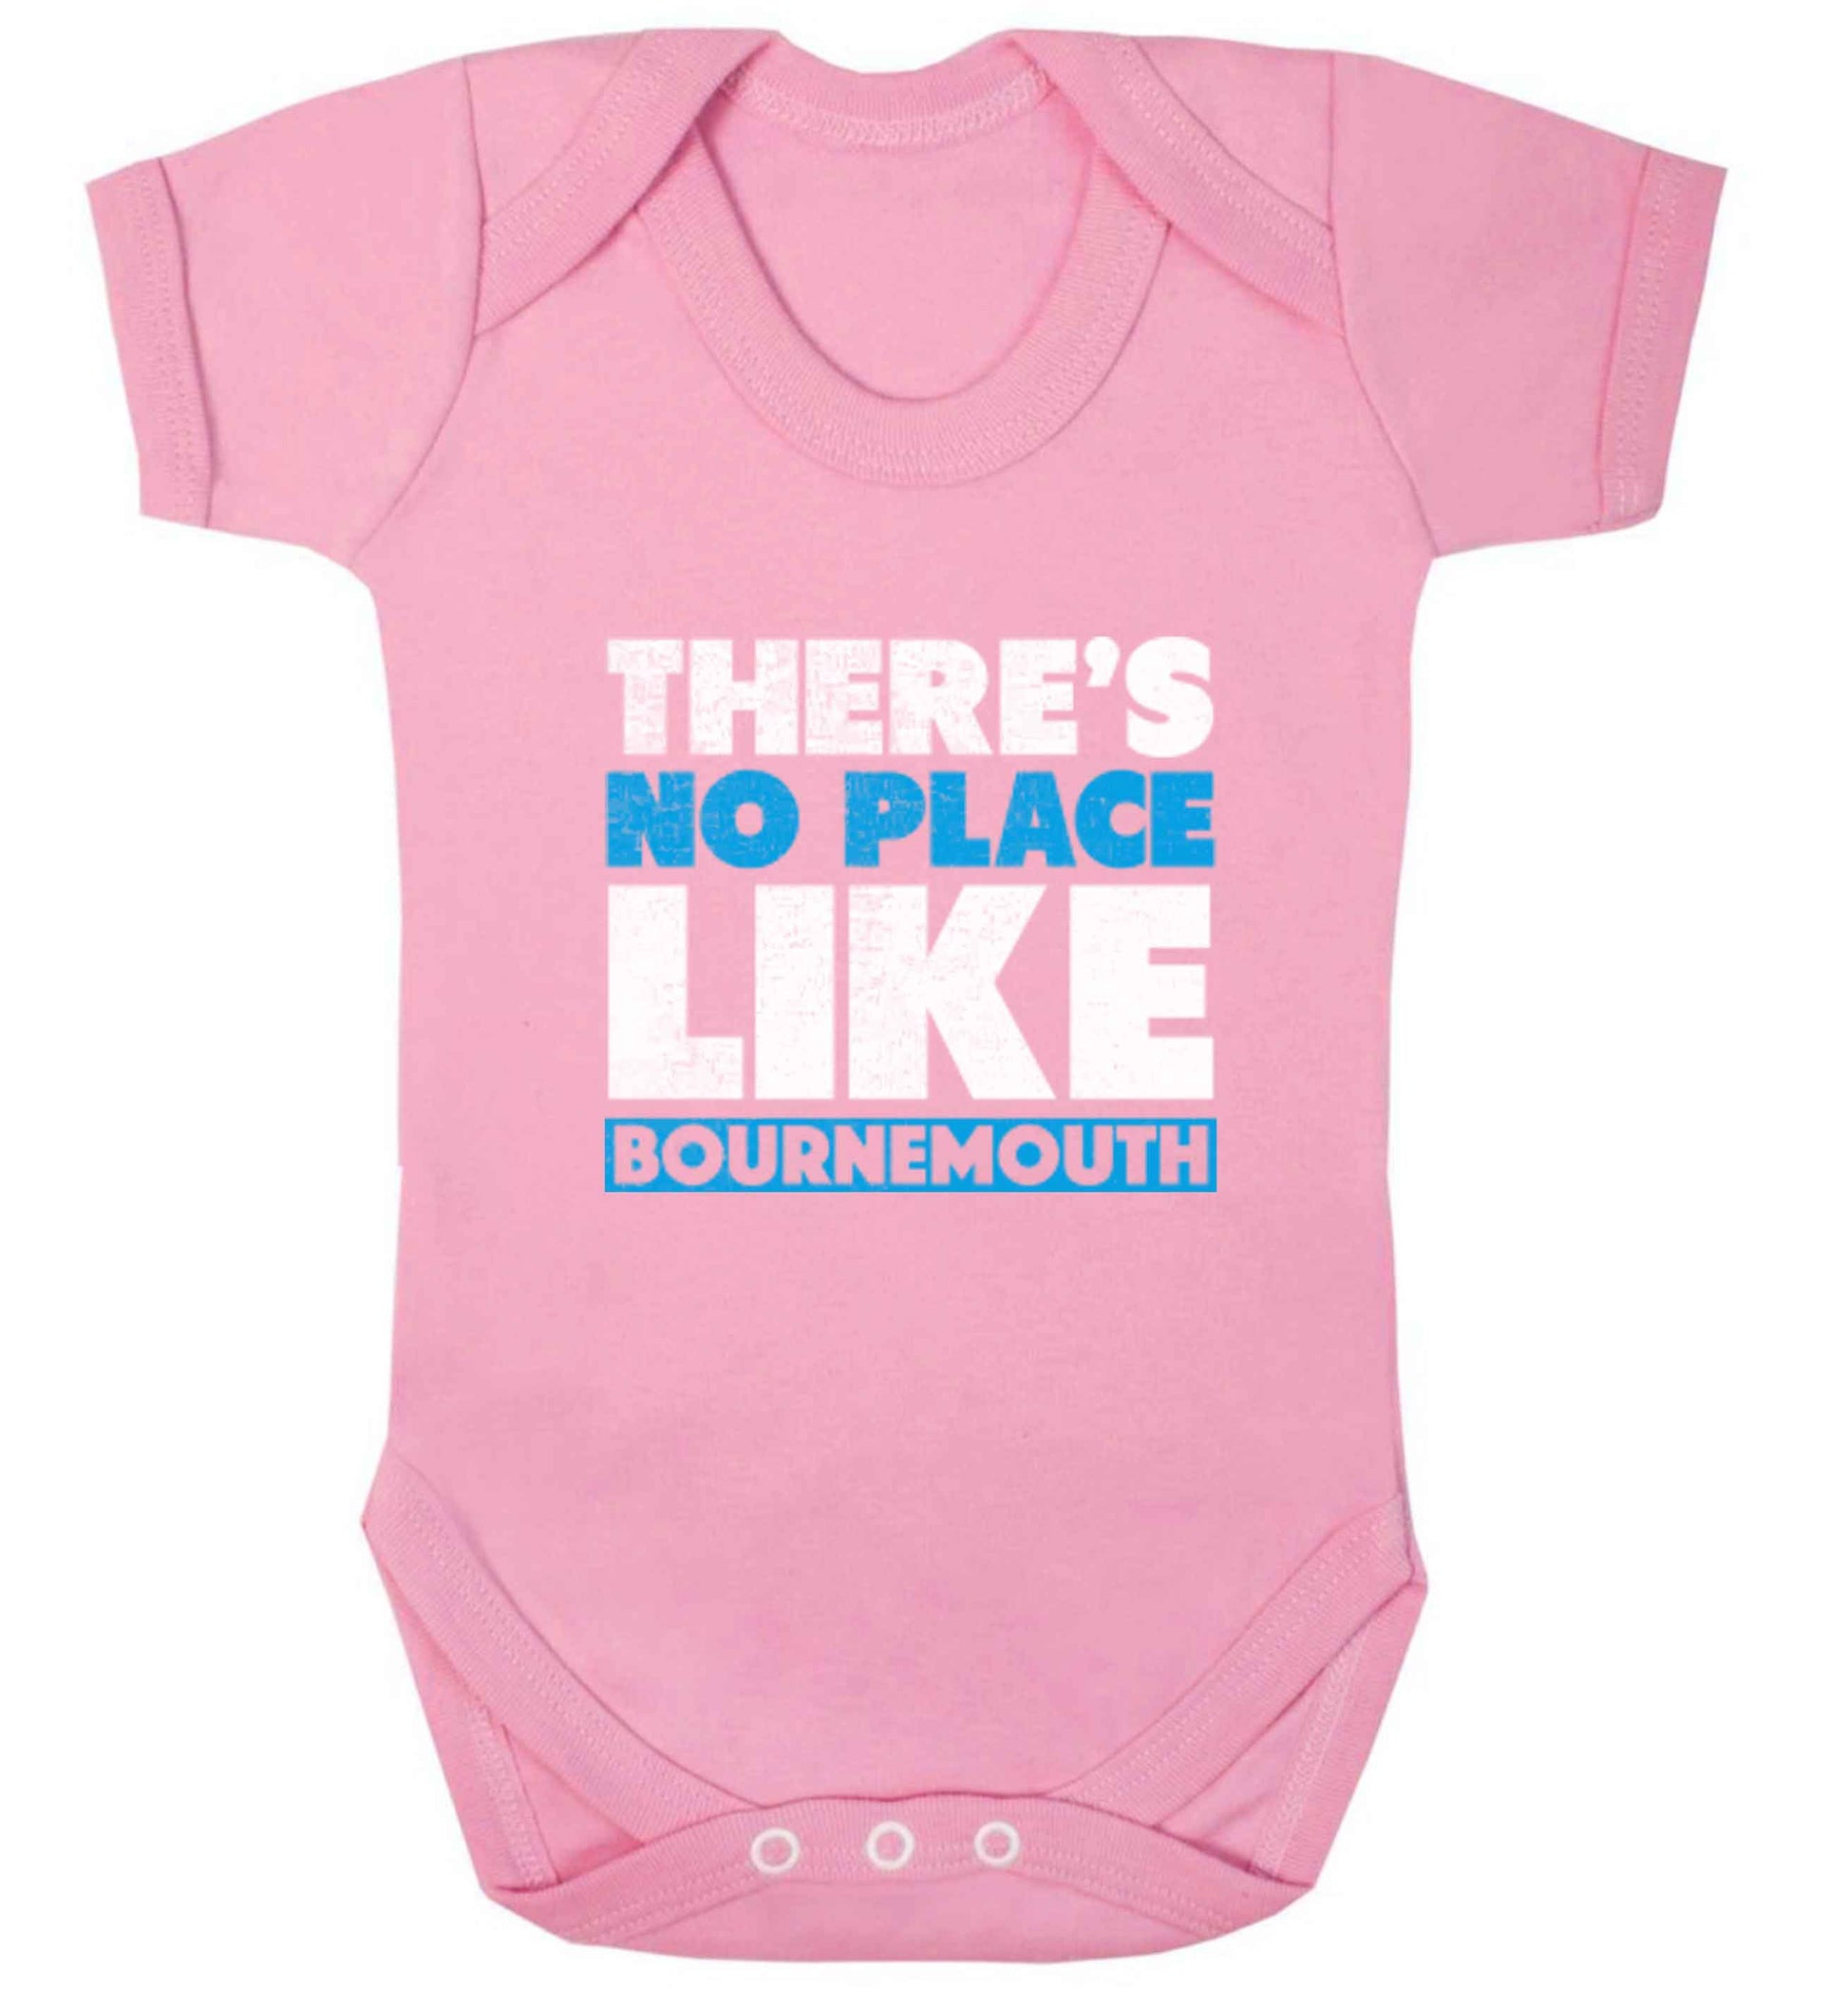 There's no place like Bournemouth baby vest pale pink 18-24 months